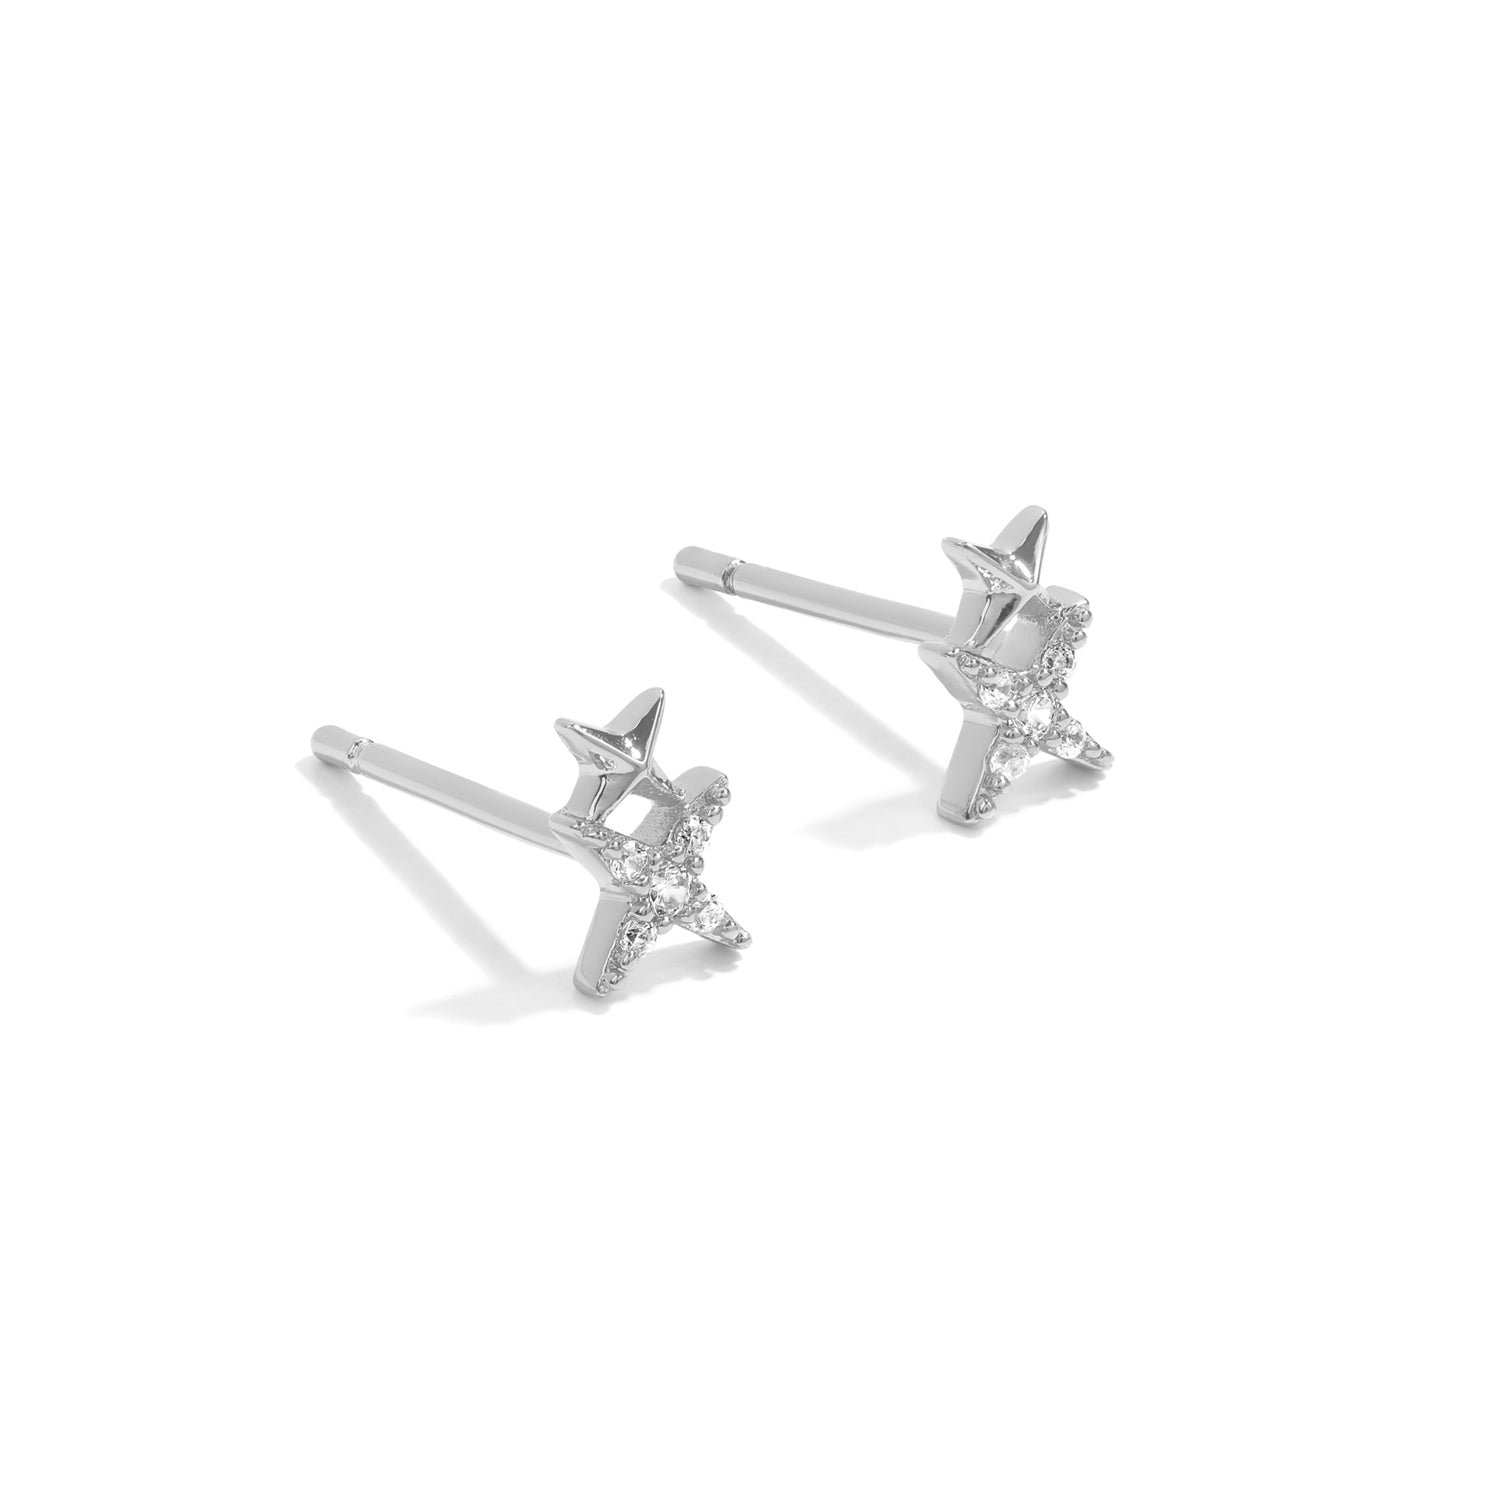 Simple and dainty studs. 925 silver earrings set with cubic zirconia stones.